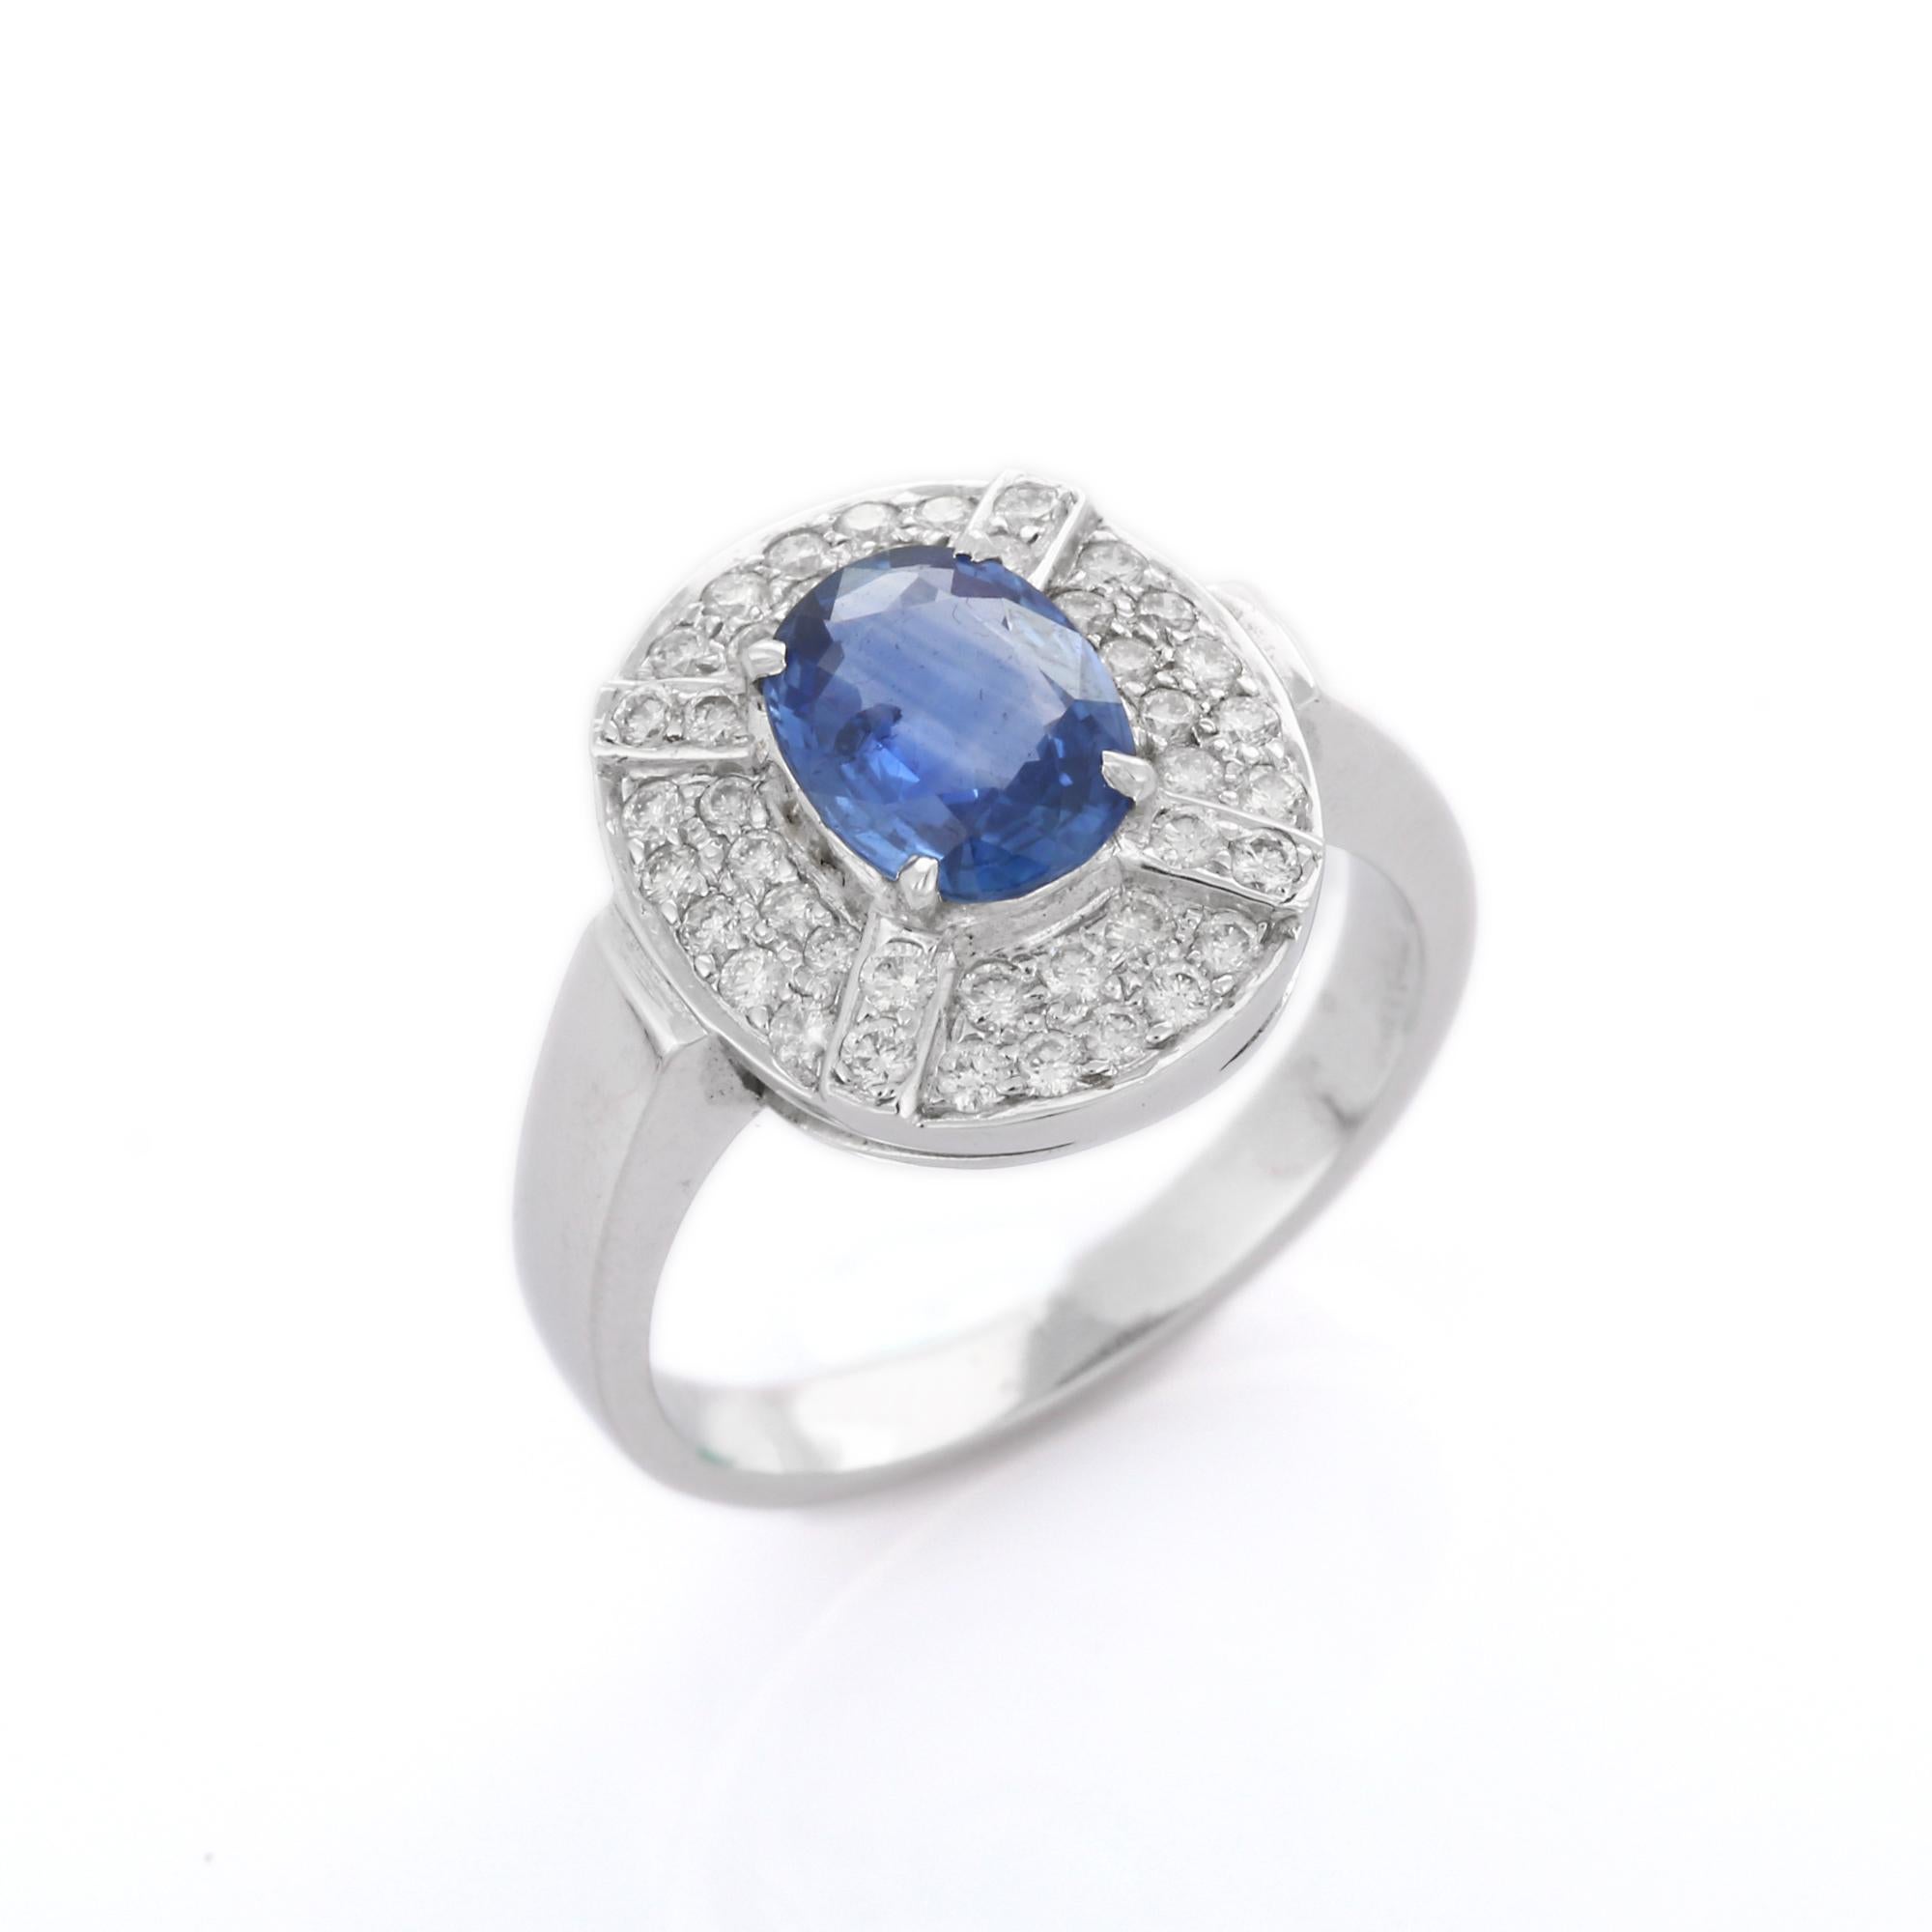 For Sale:  Art Deco Style 1.44 Ct Blue Sapphire Diamond Wedding Ring in 18K White Gold 4